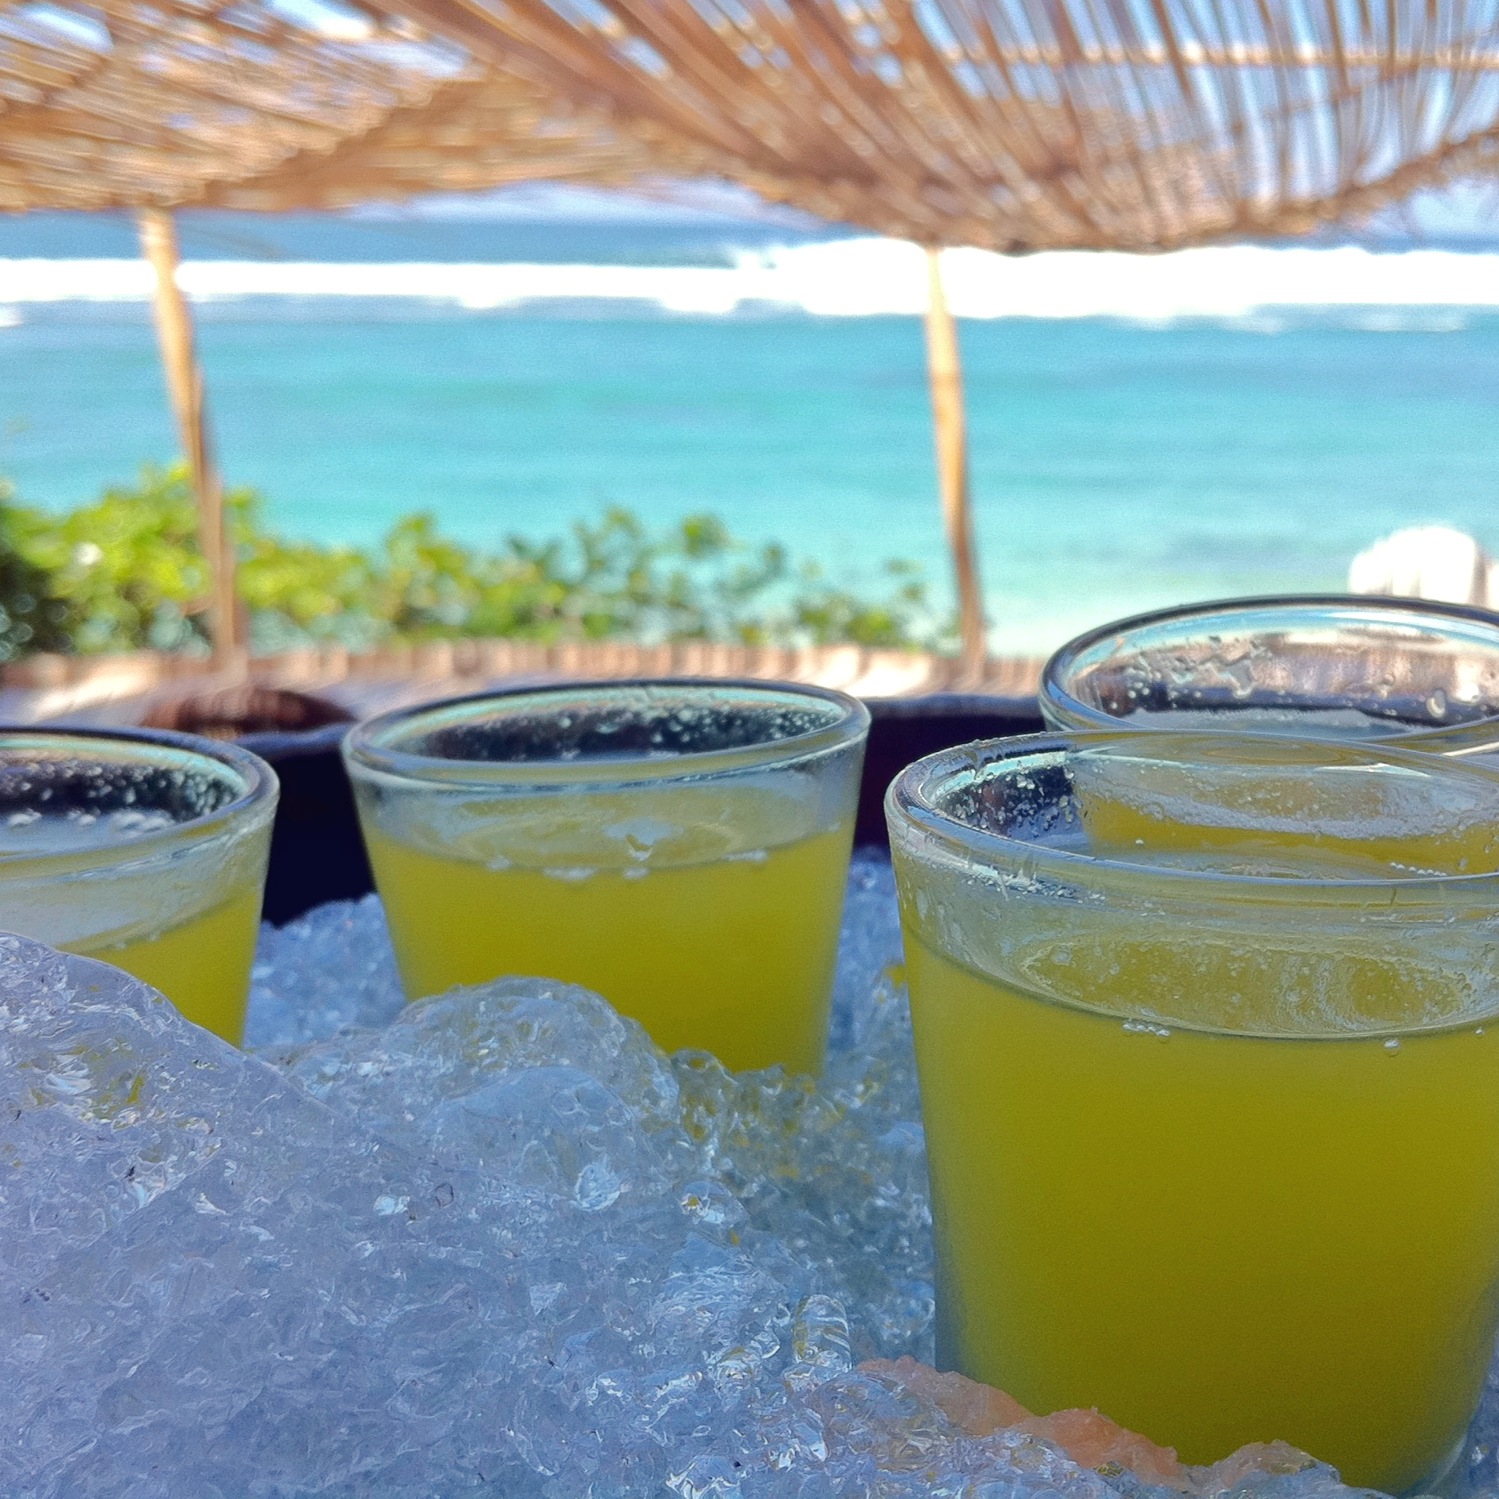 File:Ice cold drinks by the beach (6007722799).jpg - Wikimedia Commons